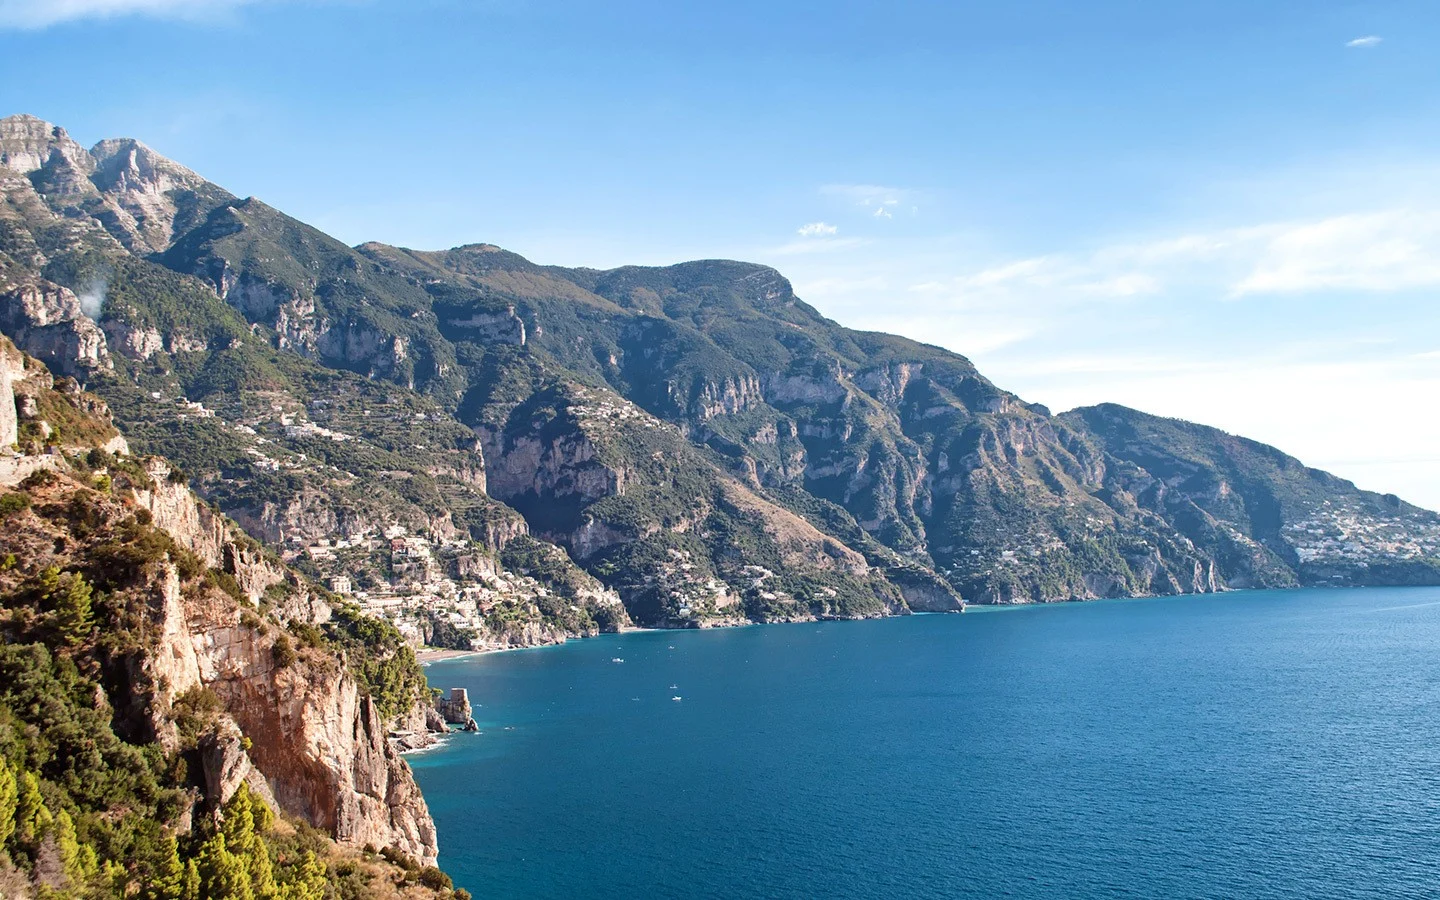 Looking down the Amalfi Coast from the scenic coastal highway